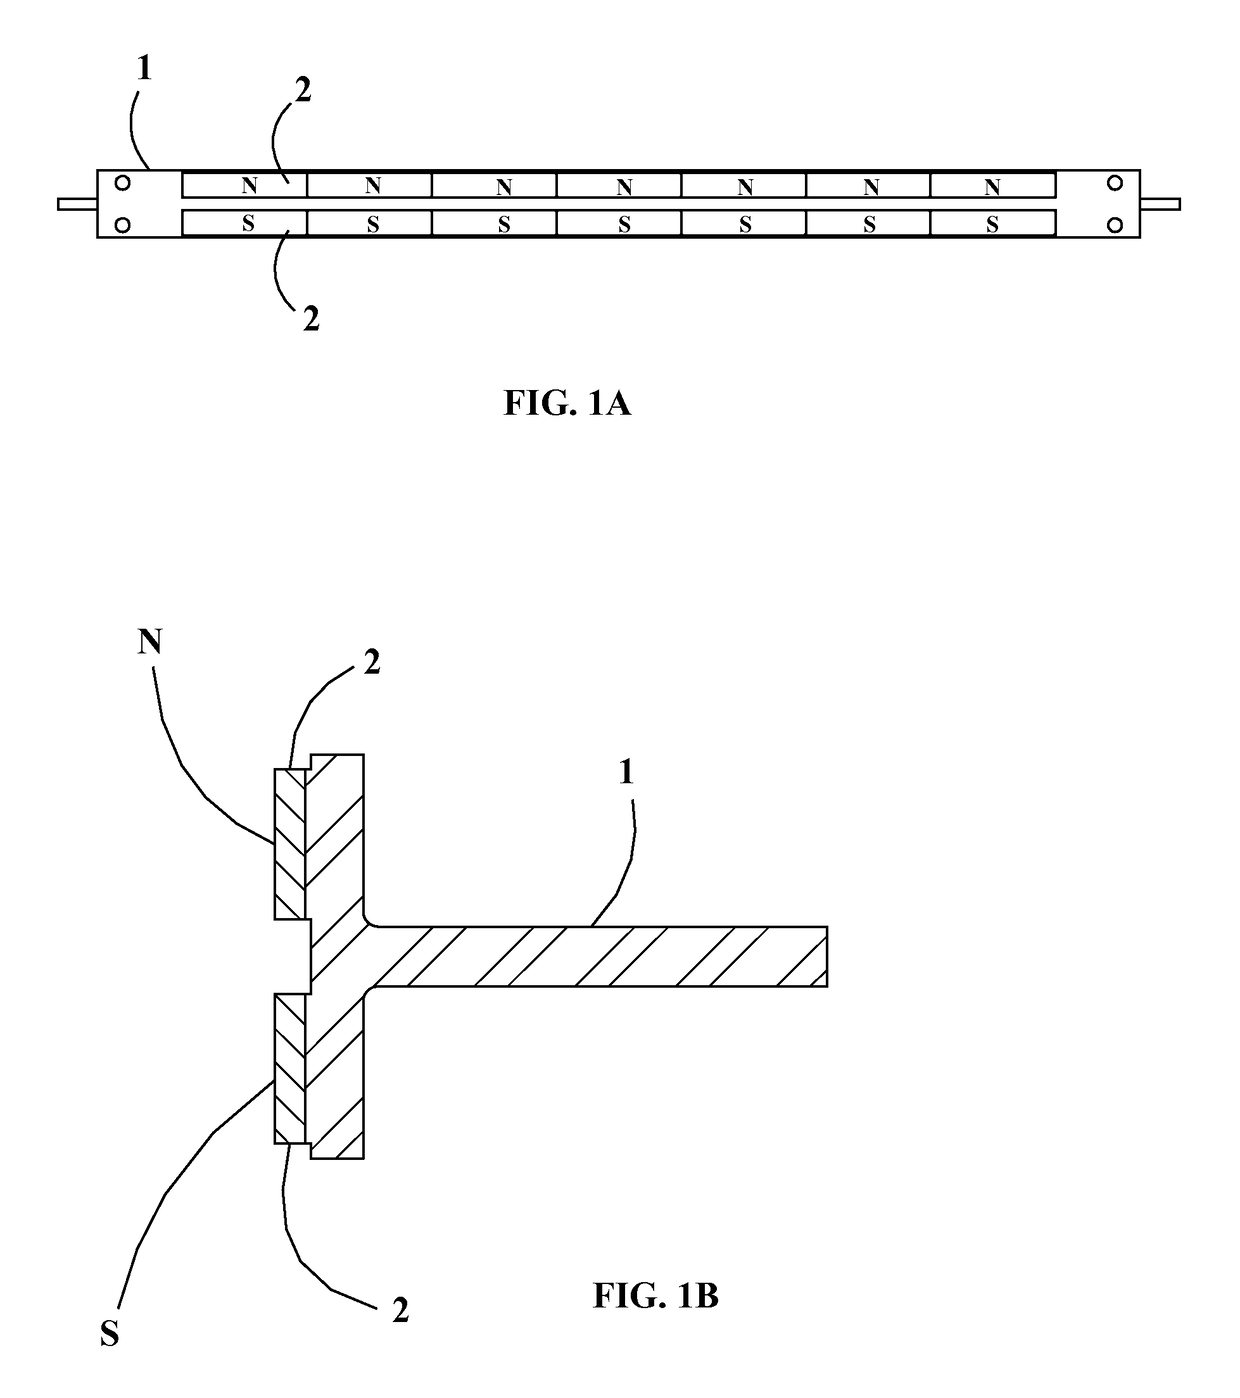 Moving coil module comprising a substrate patterned with a conductor trace